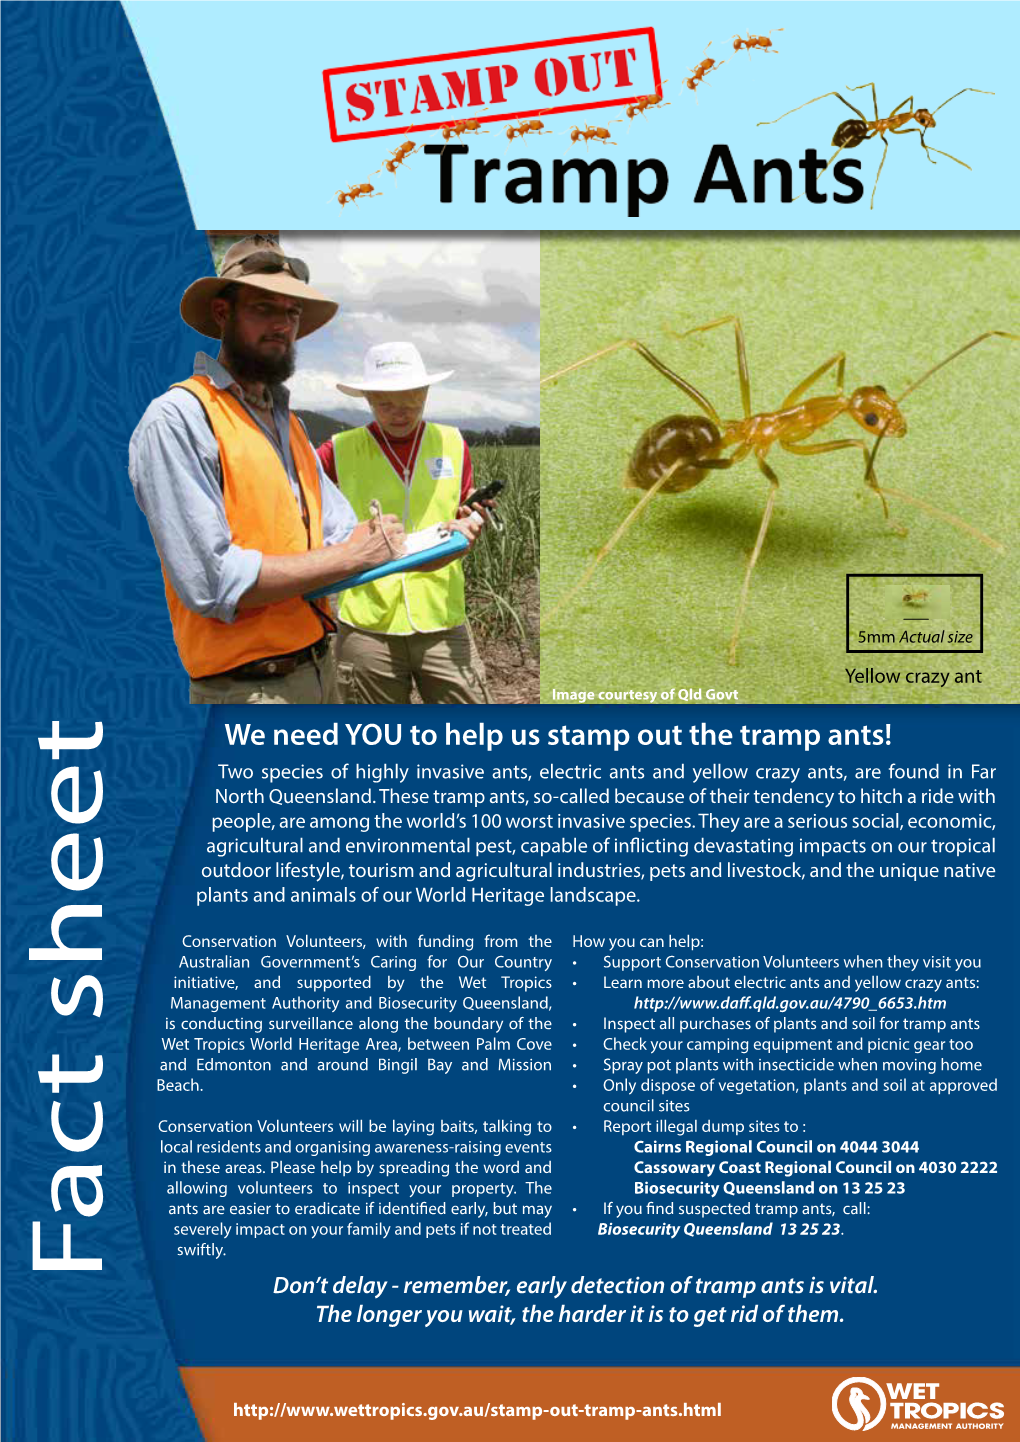 Download the Stamp out Tramp Ants Factsheet